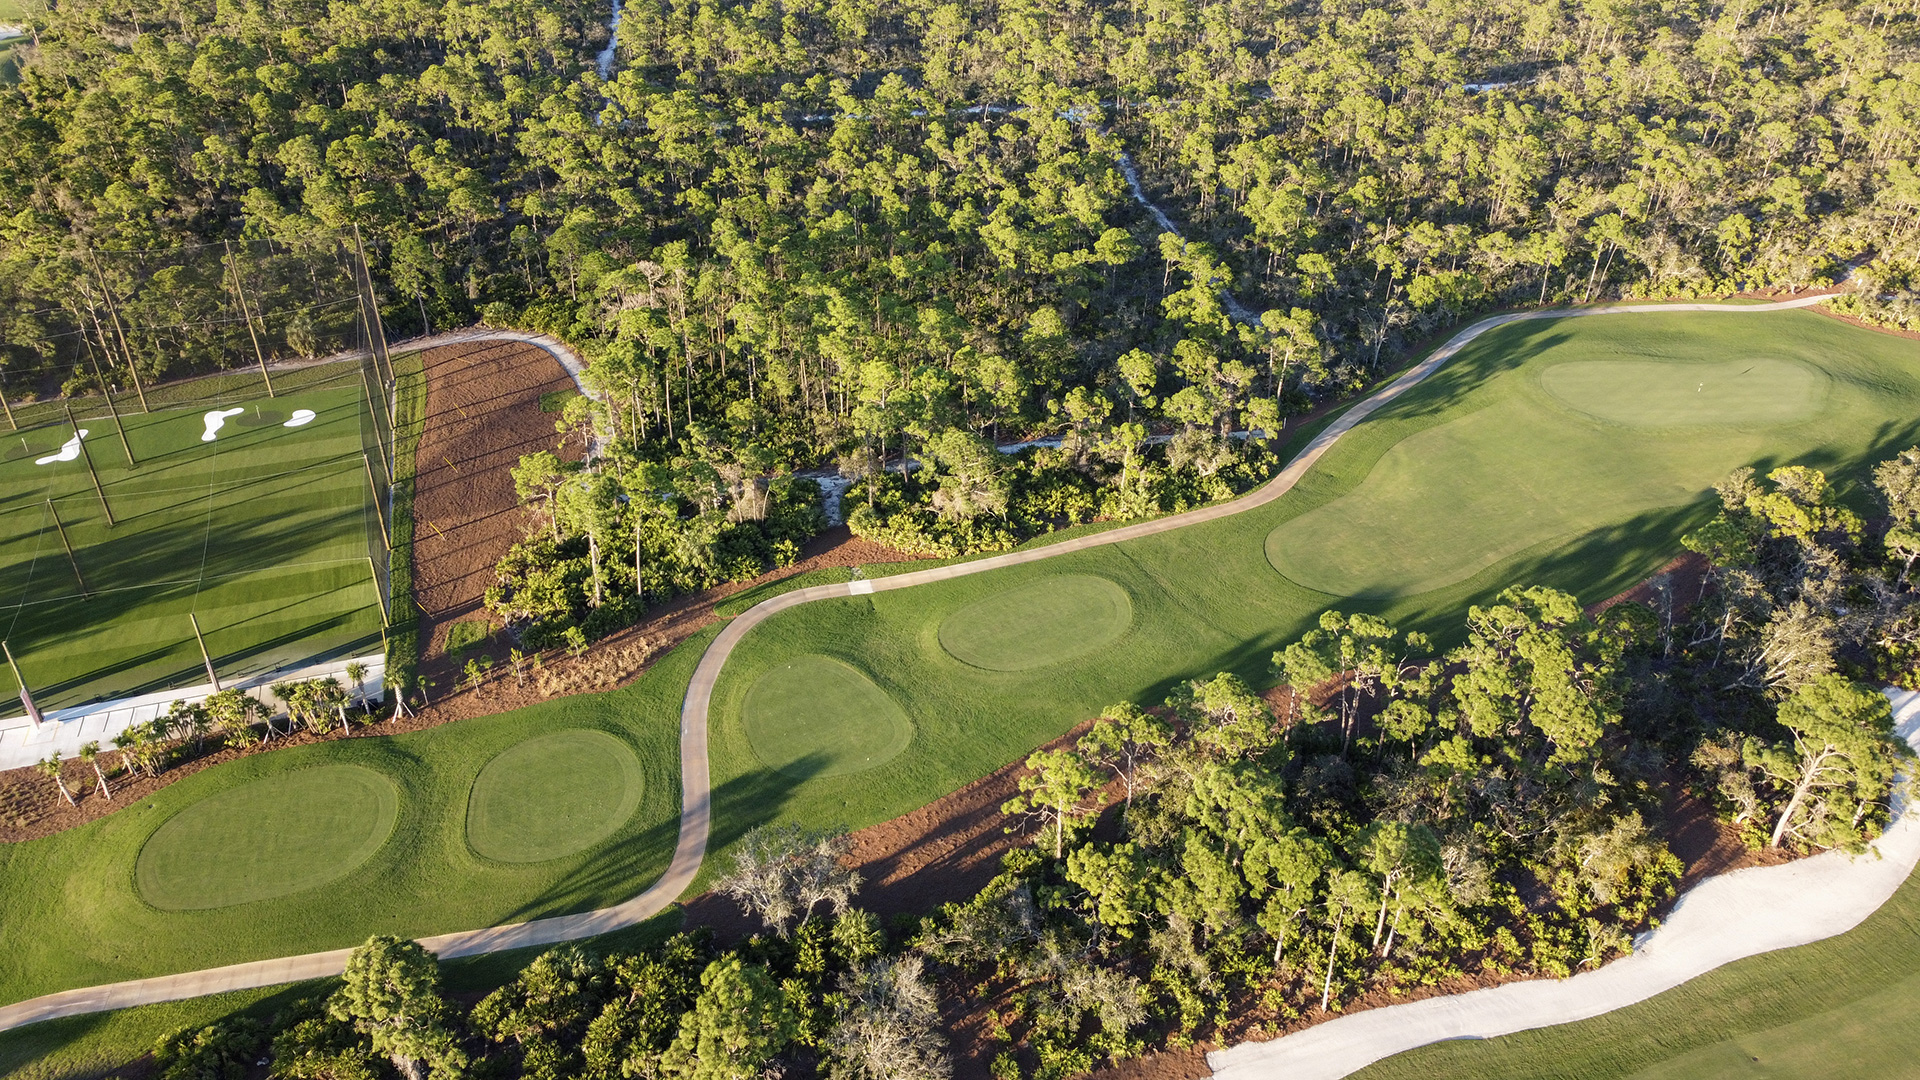 An aerial view of the Saltleaf Golf Preserve, a championship golf course in Bonita Springs, surrounded by trees.